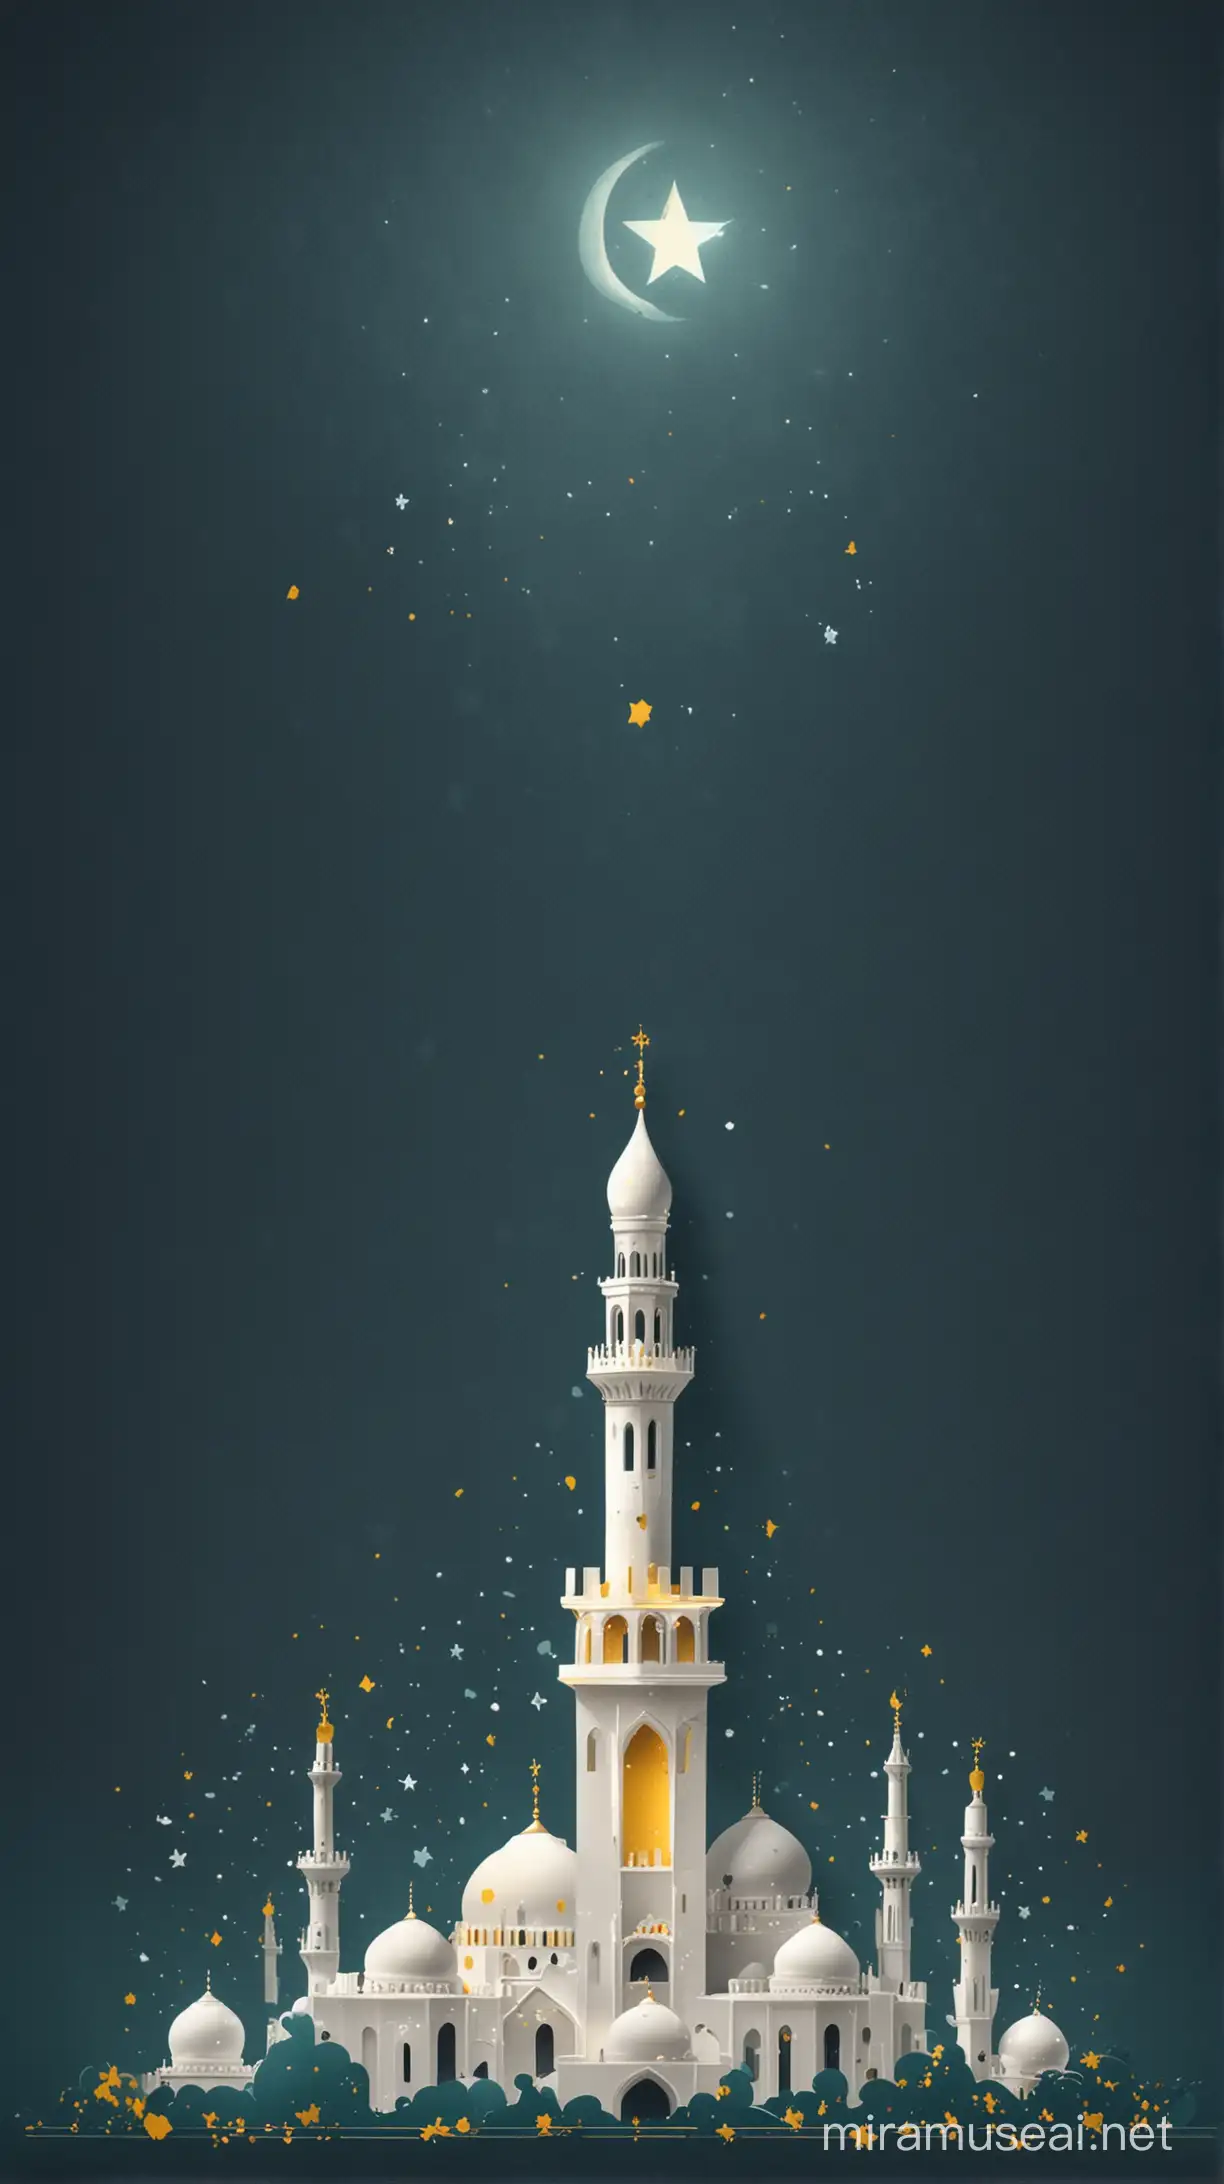 Elegant White Vector Mosque with Starry Night Sky and Glowing Lantern